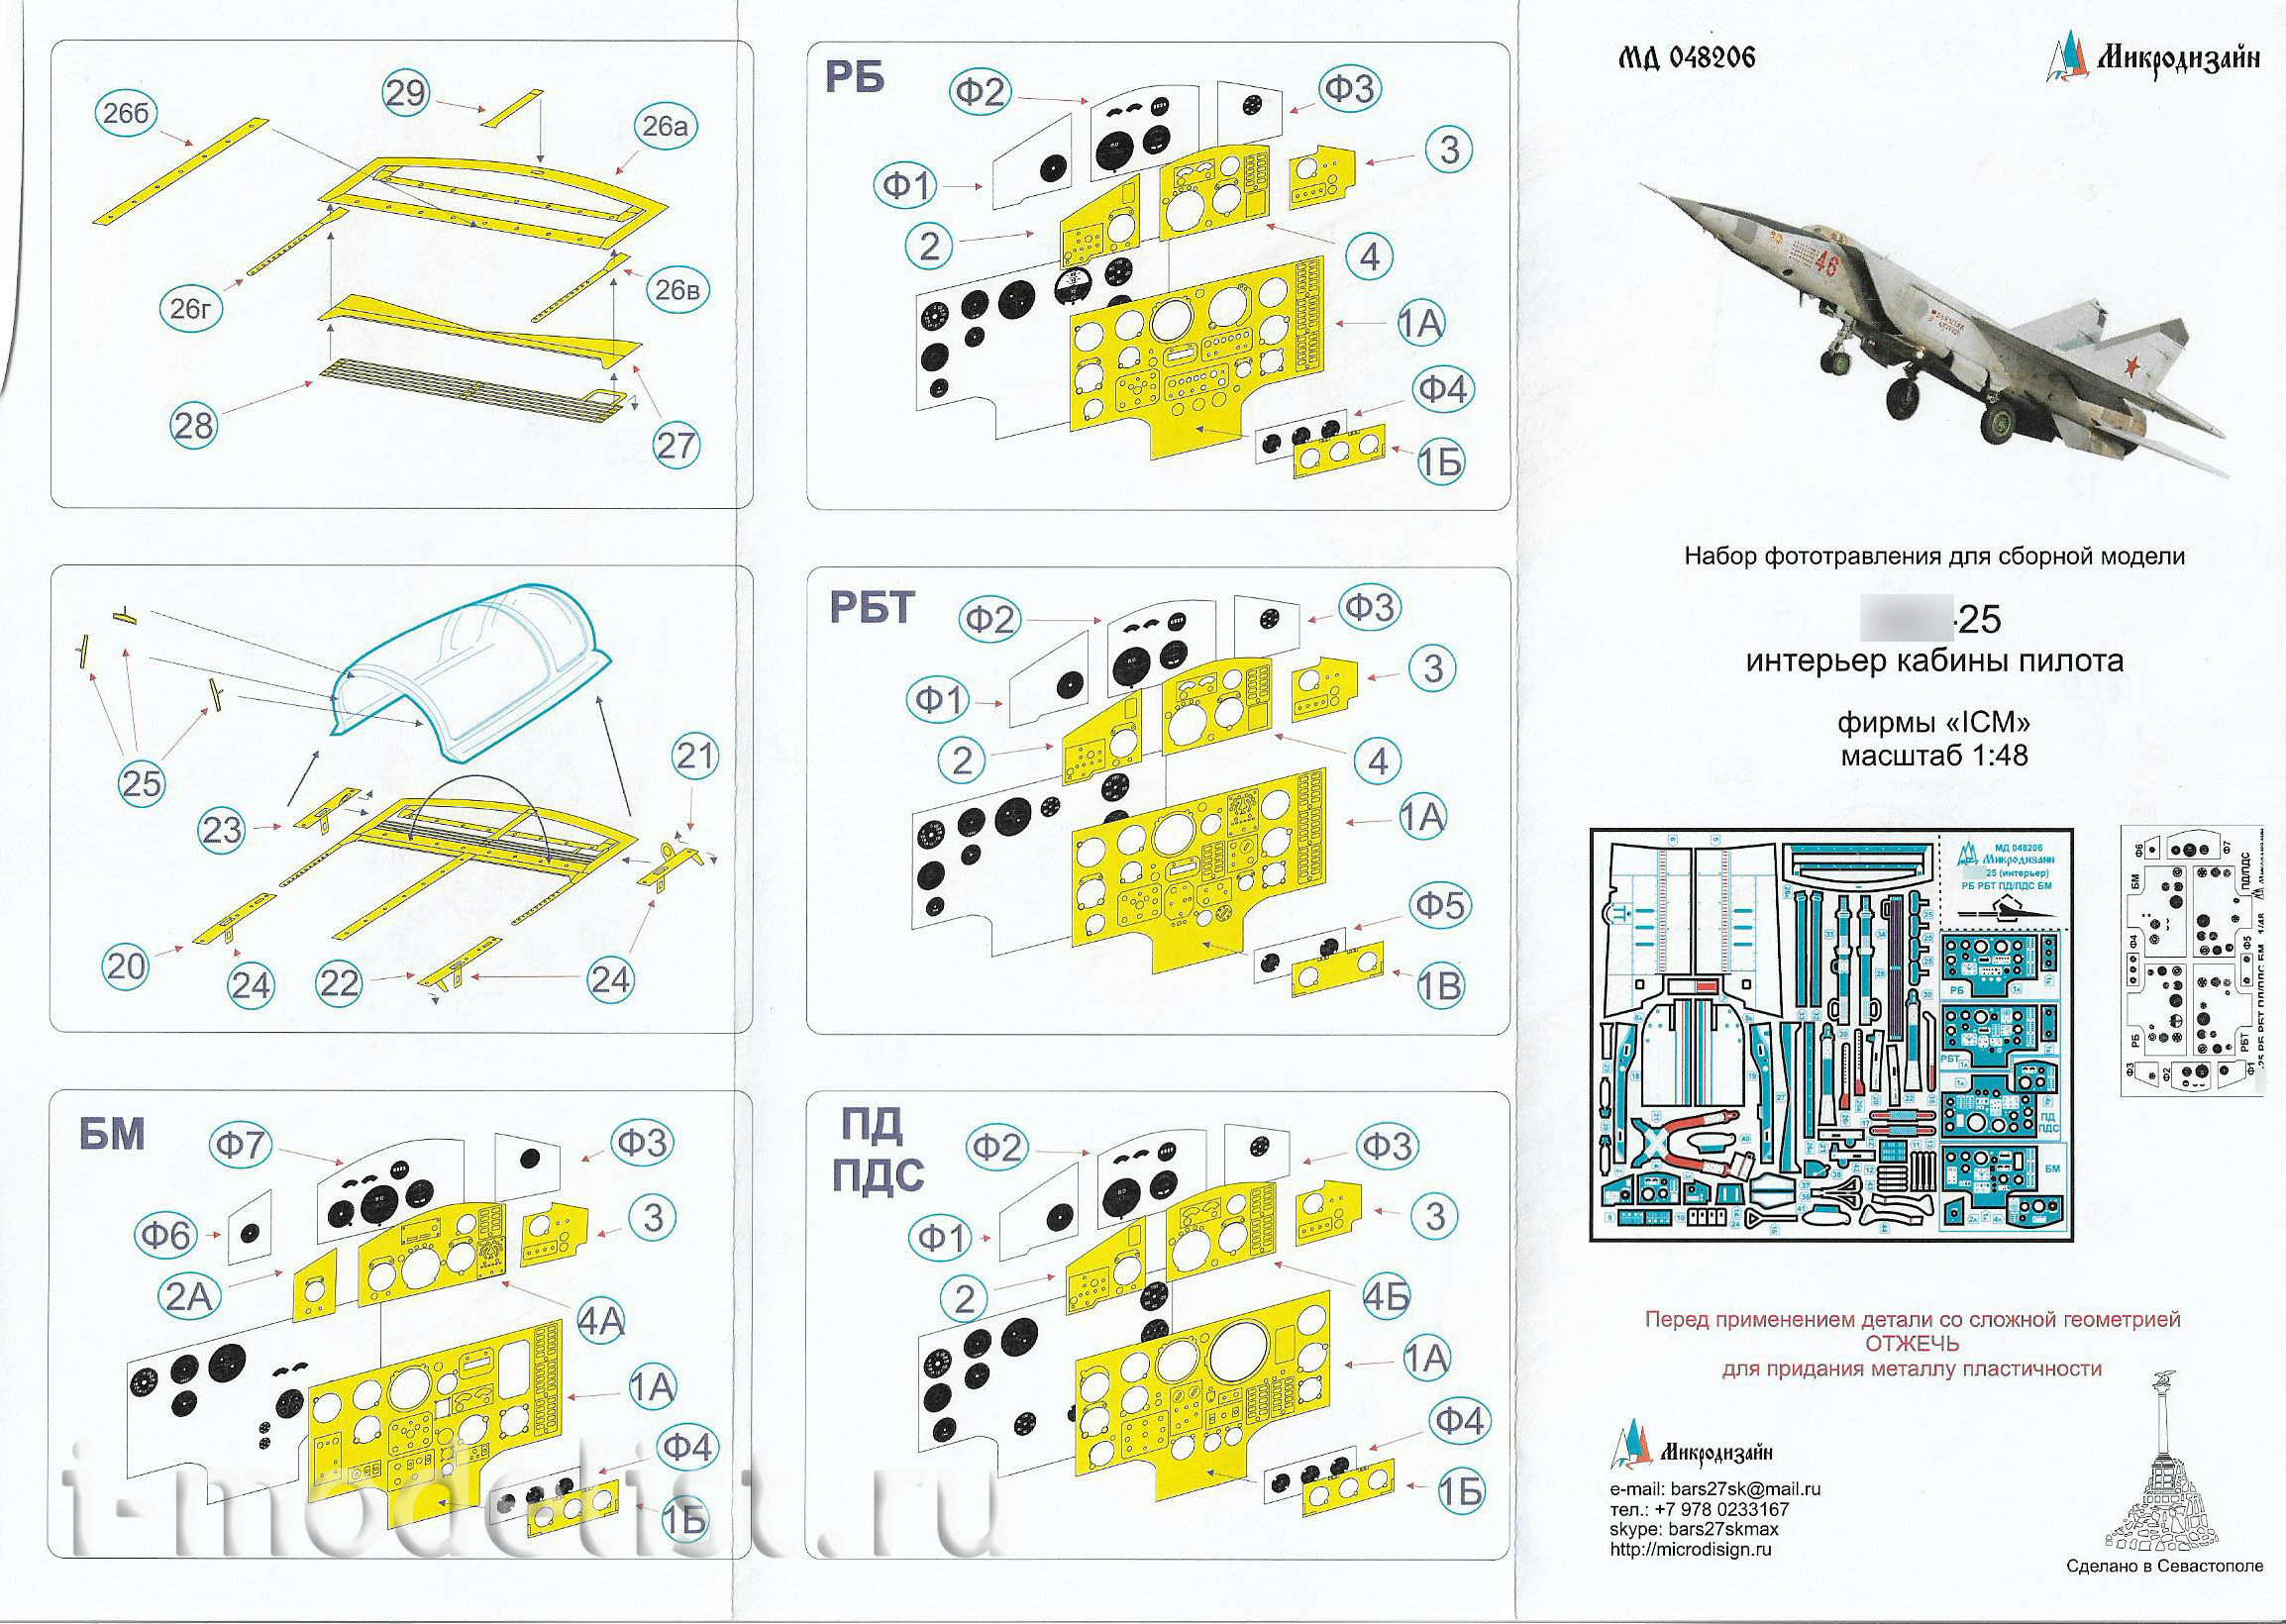 048206 Microdesign 1/48 photo etched parts for MiGG-25 RBT cockpit